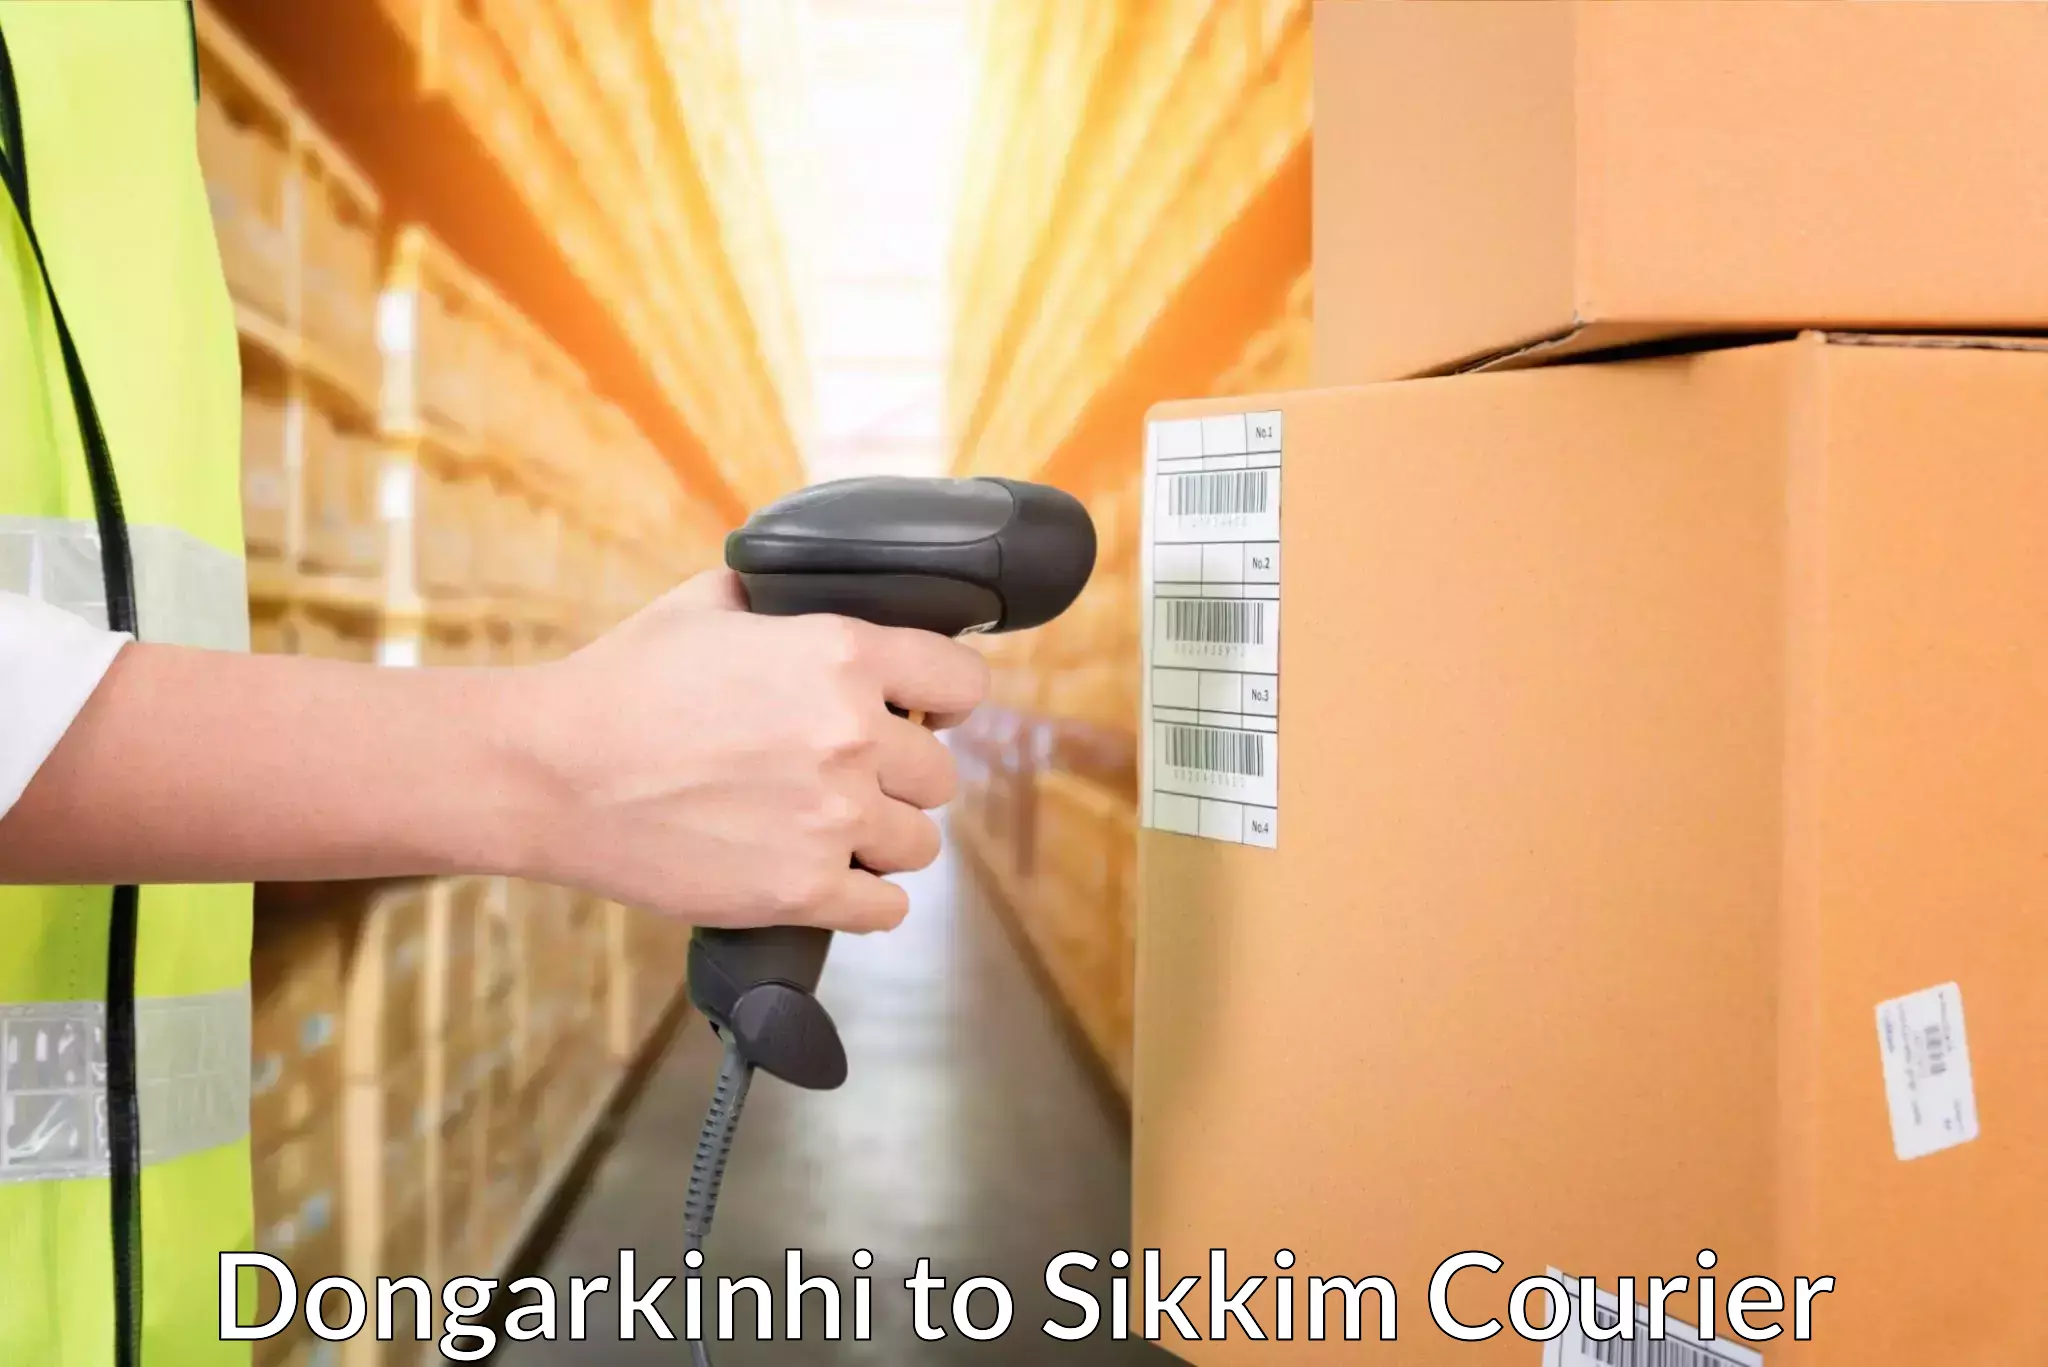 Next-day delivery options Dongarkinhi to Mangan